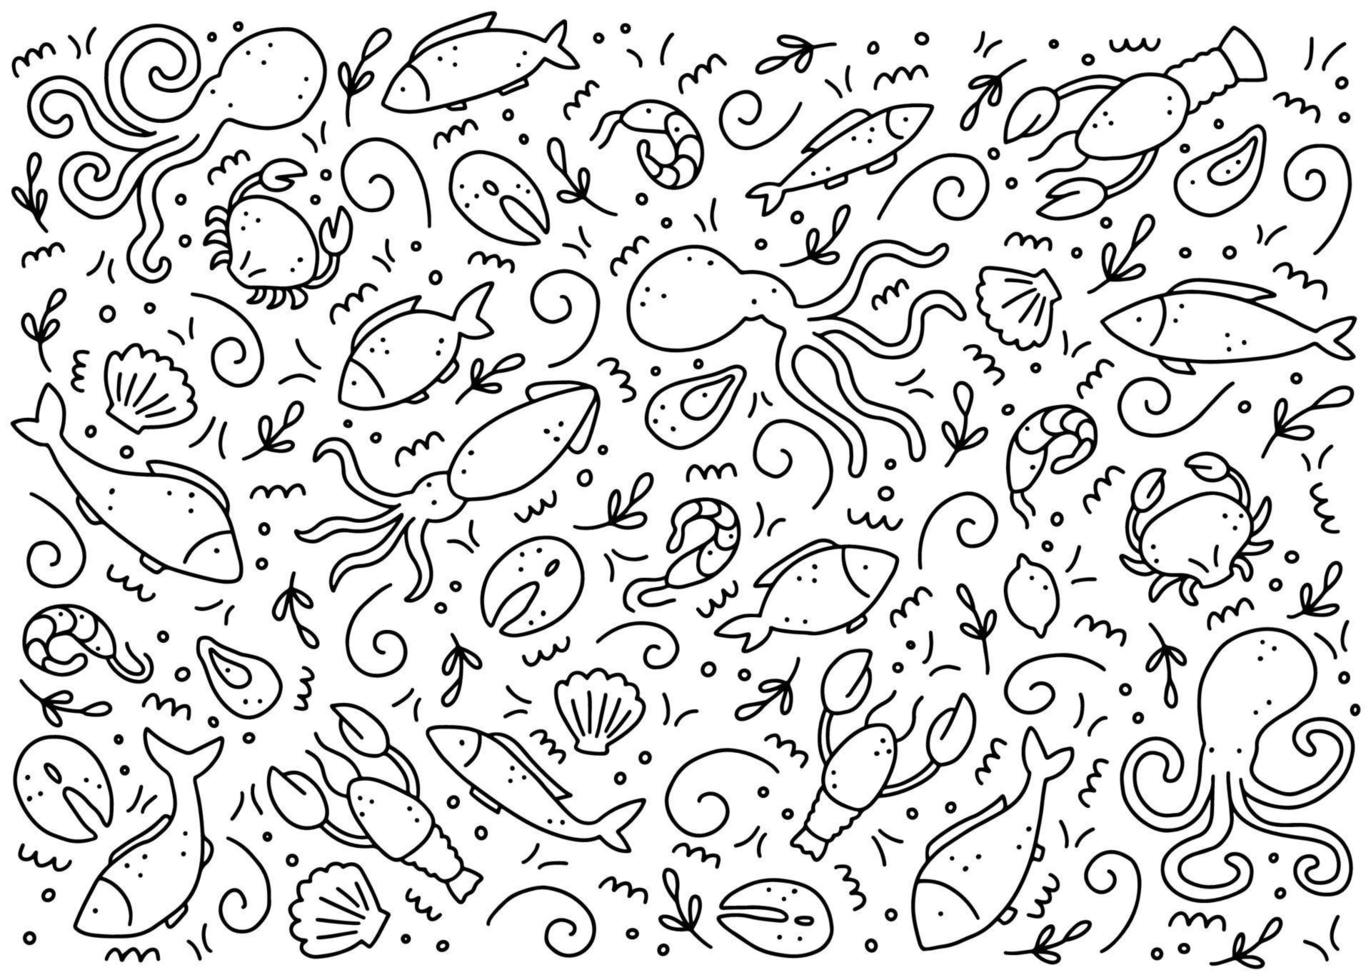 Hand drawn set of seafood elements. Doodle style vector illustration.